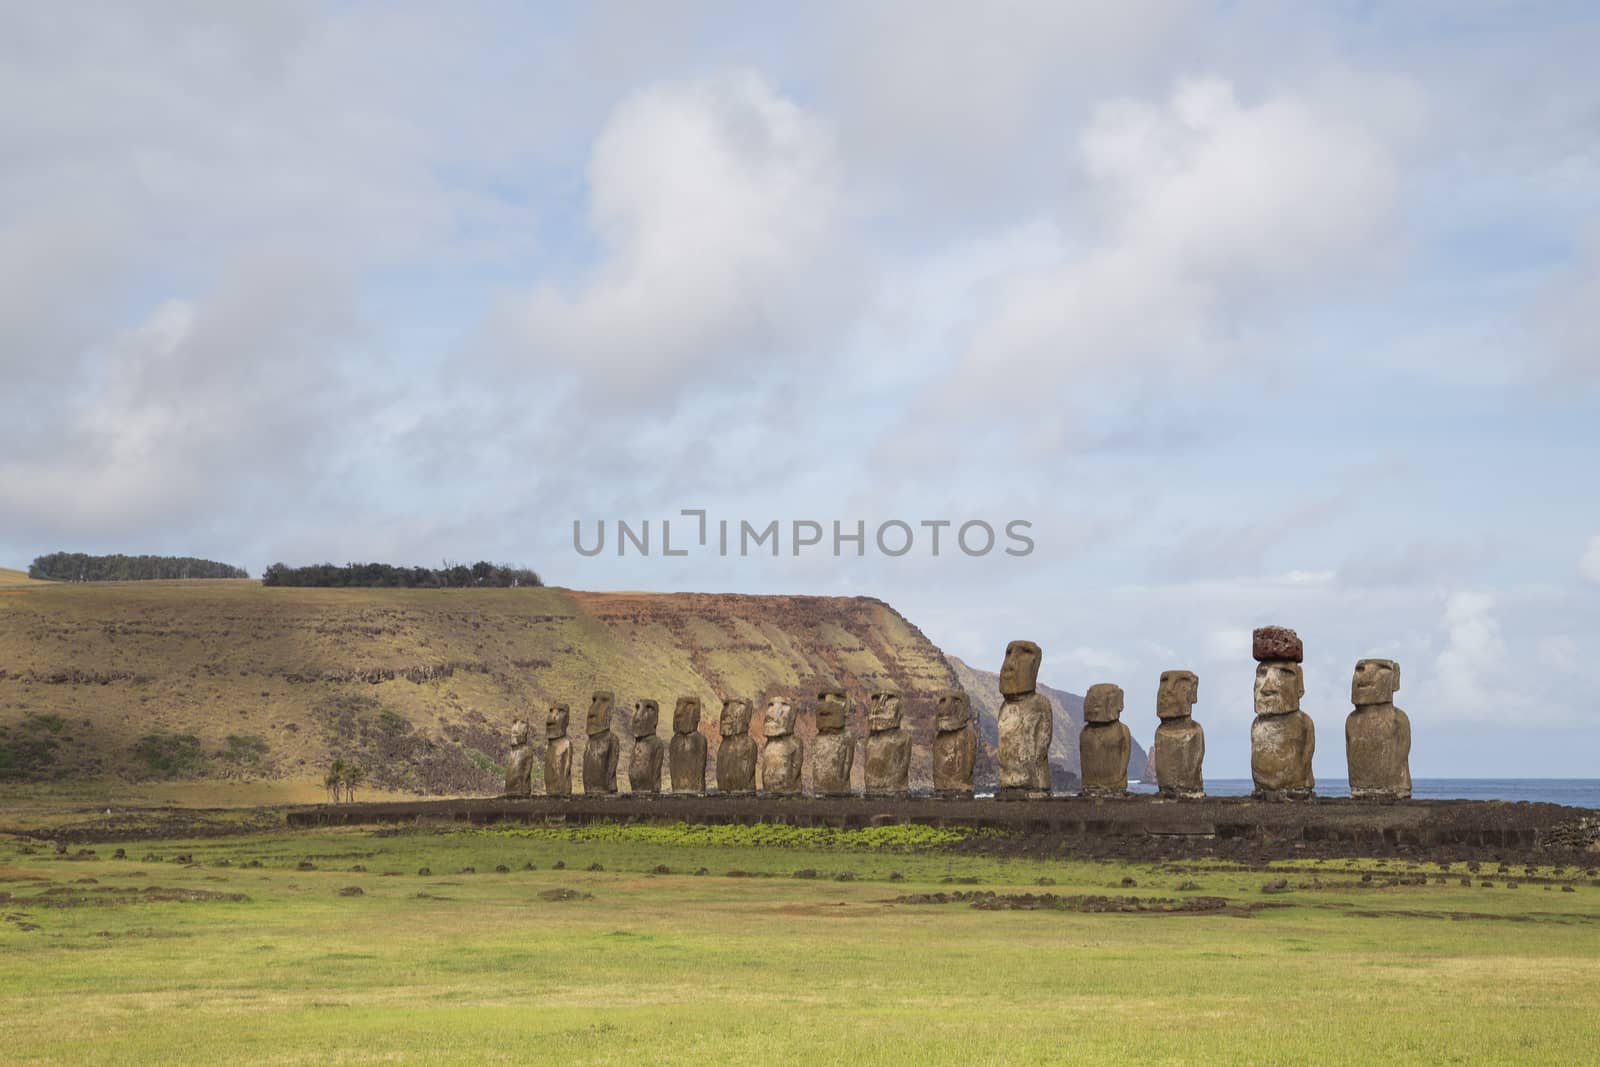 The 15 moais at Ahu Tongariki on Easter Island in Chile.